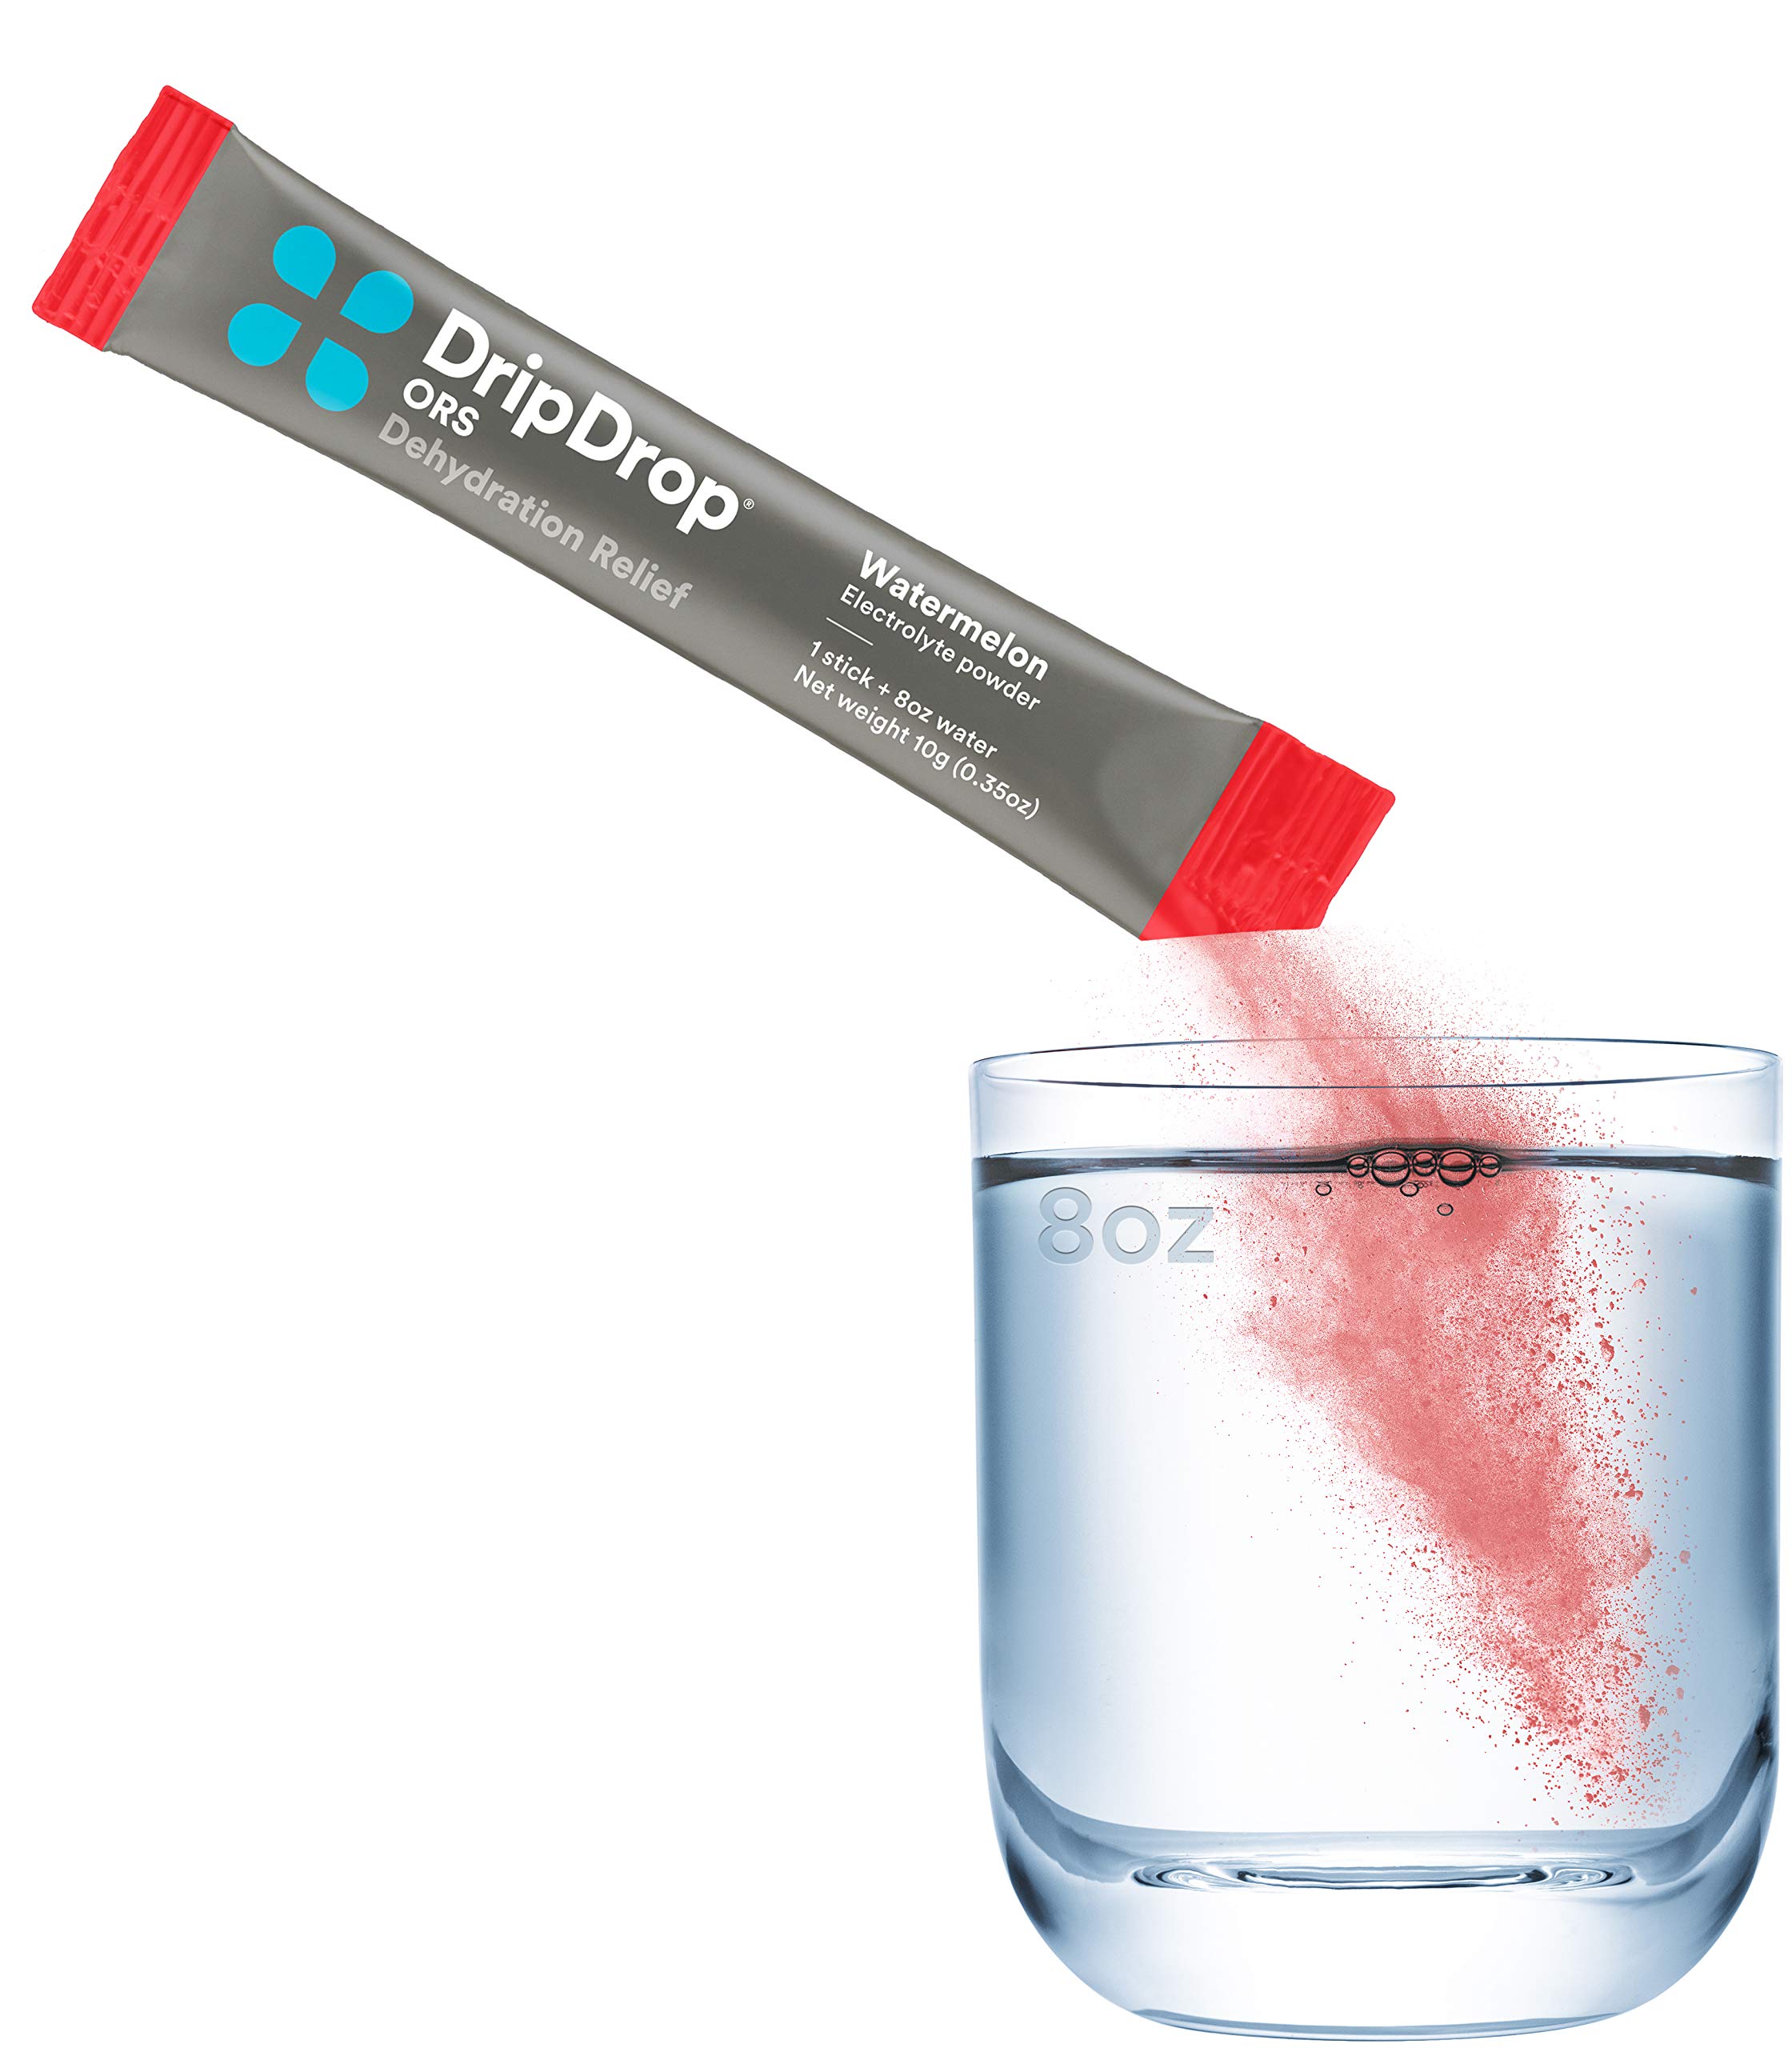 DripDrop ORS Electrolyte Hydration Powder Sticks, Lemon/Berry/Watermelon Variety Pack, 10g Sticks, 8 Count (Pack of 3)